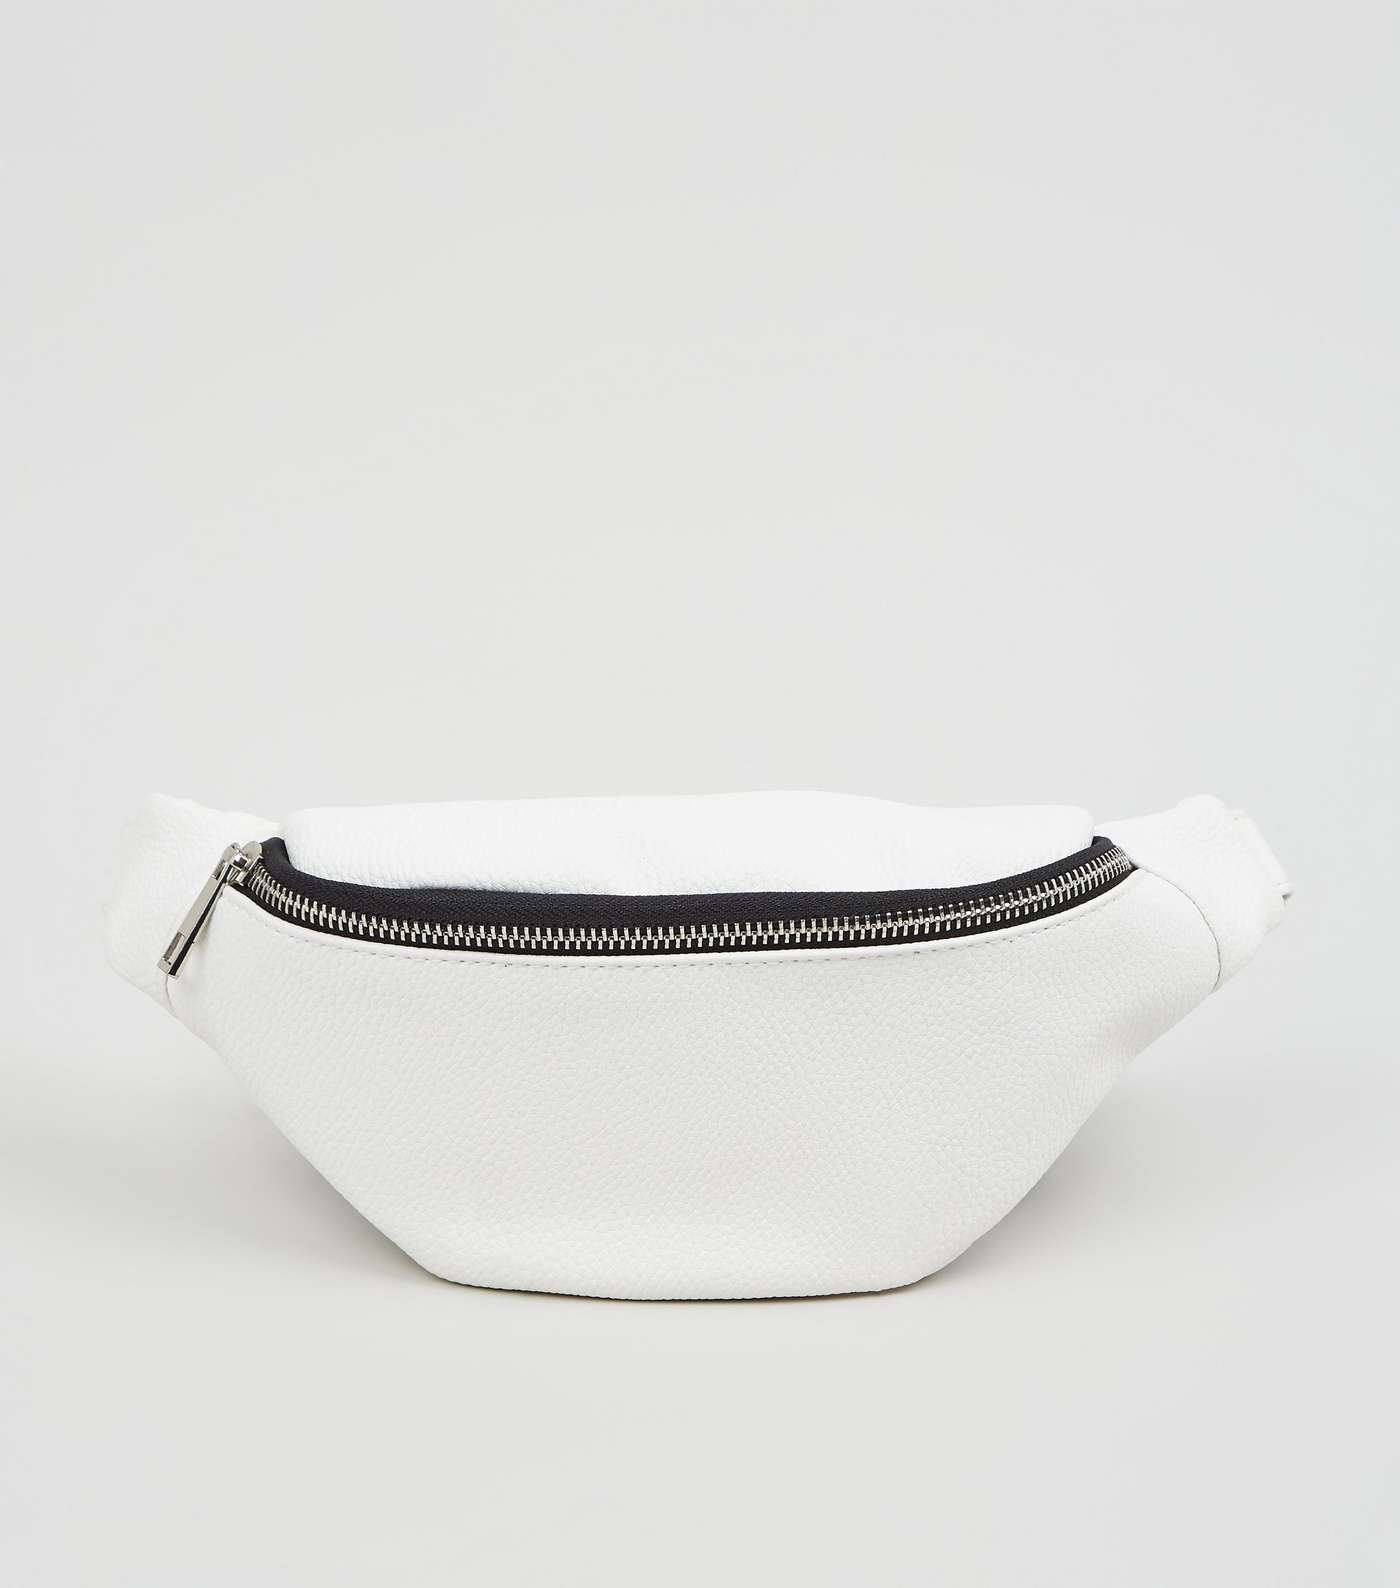 White Leather-Look Chain Strap Utility Bum Bag Image 2